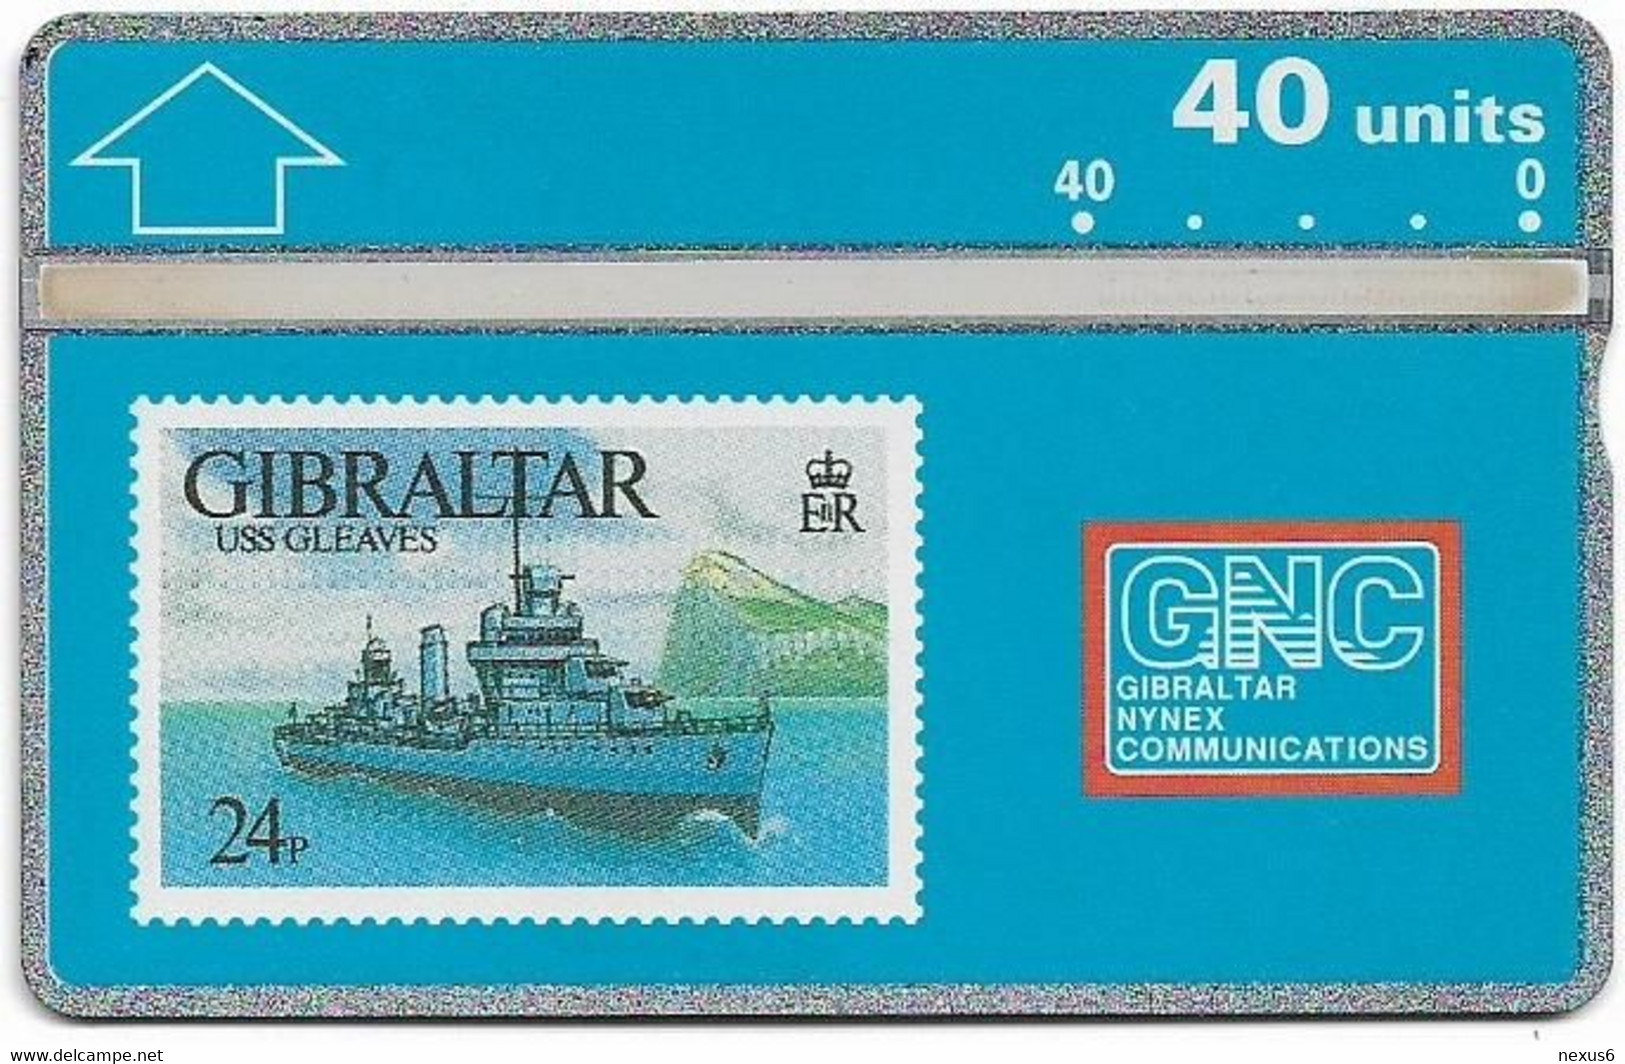 Gibraltar - GNC - L&G - Warships '93 Stamps - USS Gleaves - 306A - 06.1993, 40Units, 20.000ex, Mint - Gibilterra